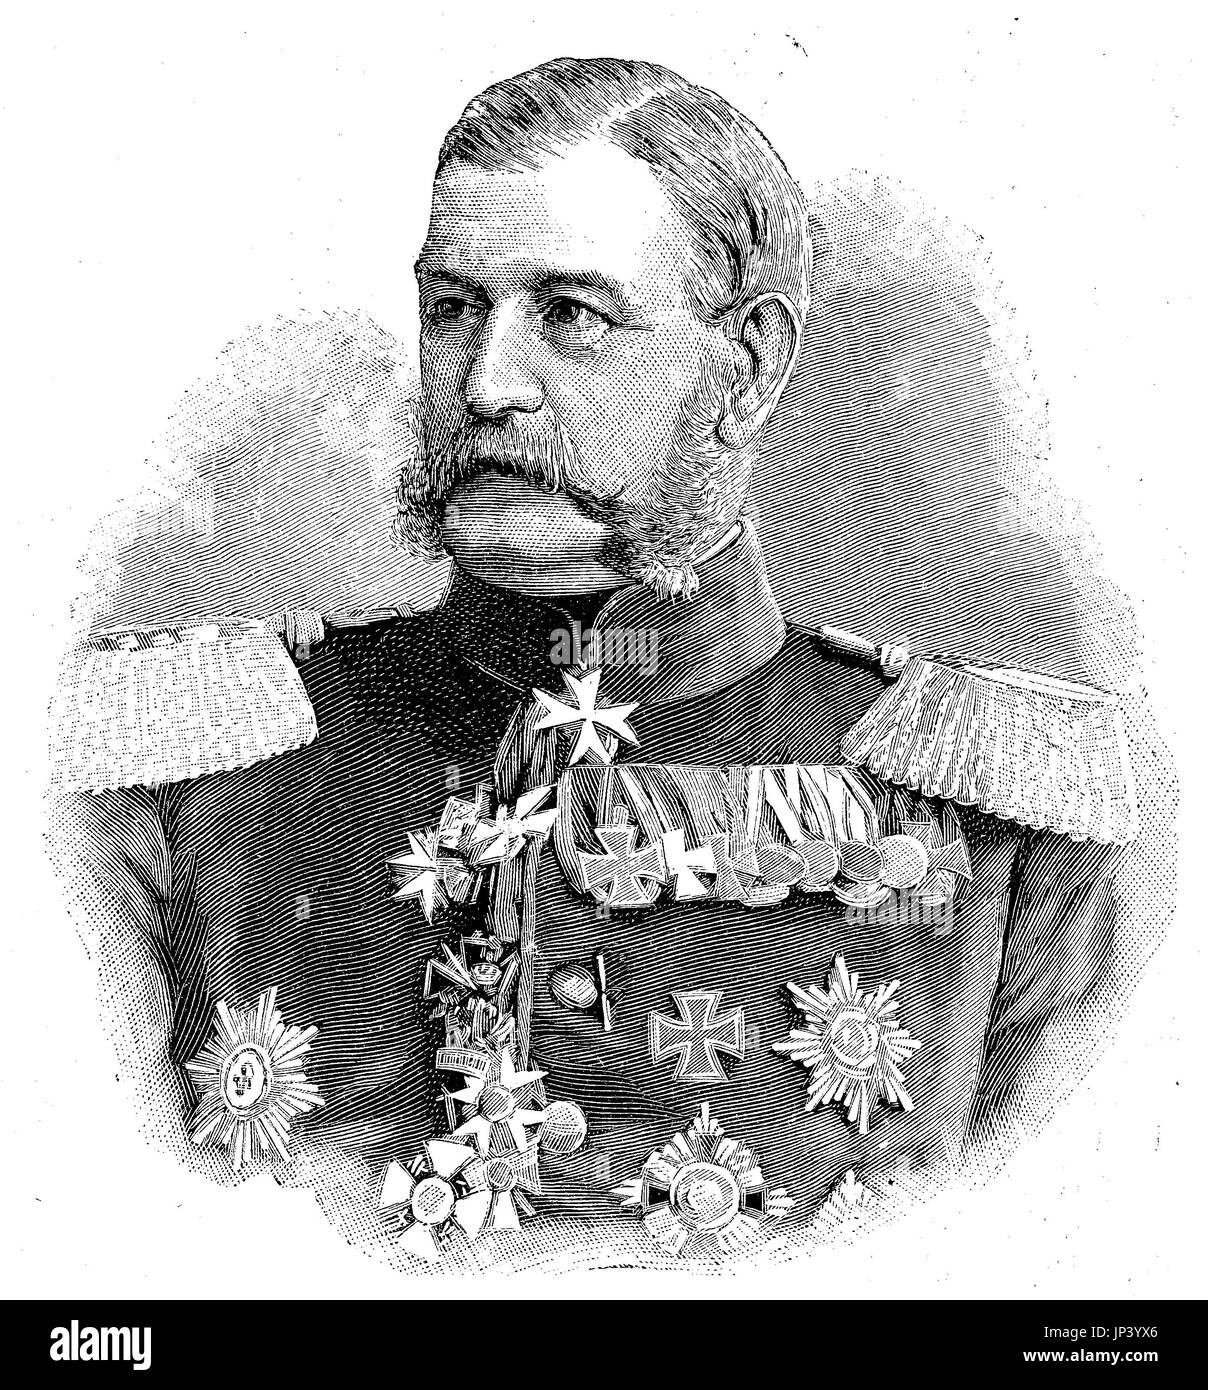 Max Ferdinand Karl von Boehn, 16 August 1850 - 18 February 1921, was a Prussian officer involved in the Franco-Prussian War and World War, Germany, digital improved reproduction of a woodcut publication from the year 1888 Stock Photo